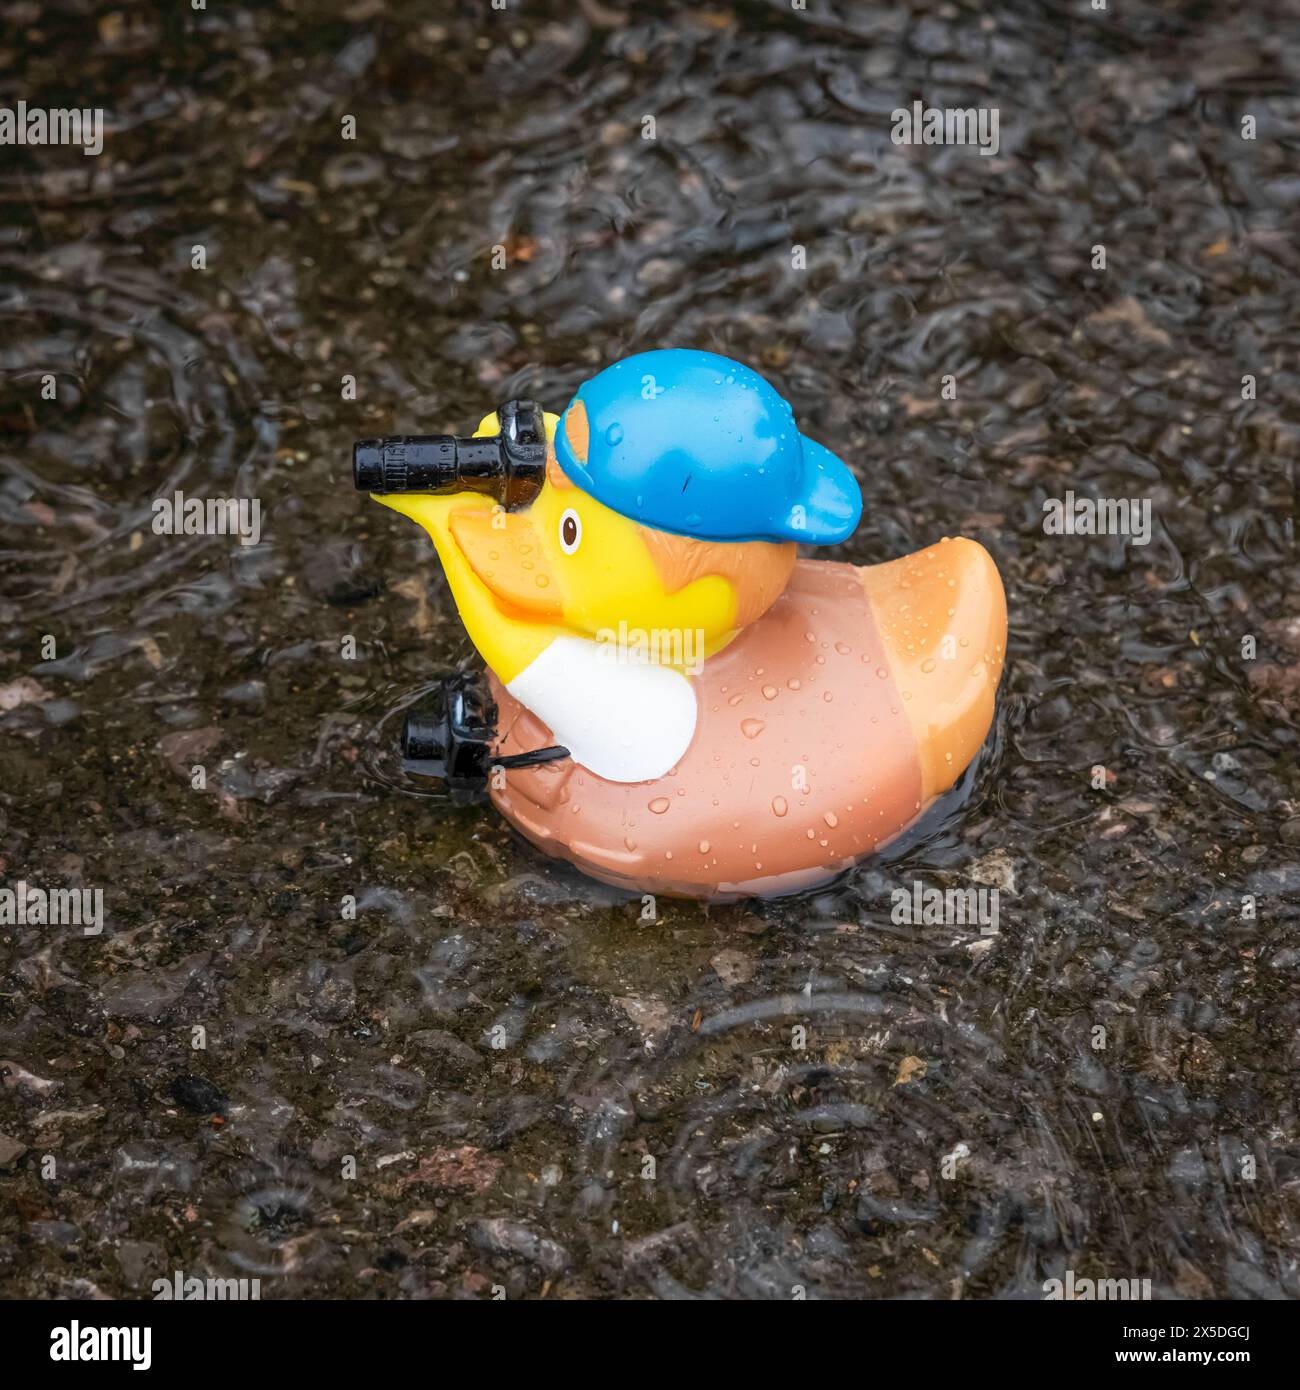 A funny picture of a Paparazzi rubber duck with a camera in a rainy puddle Stock Photo